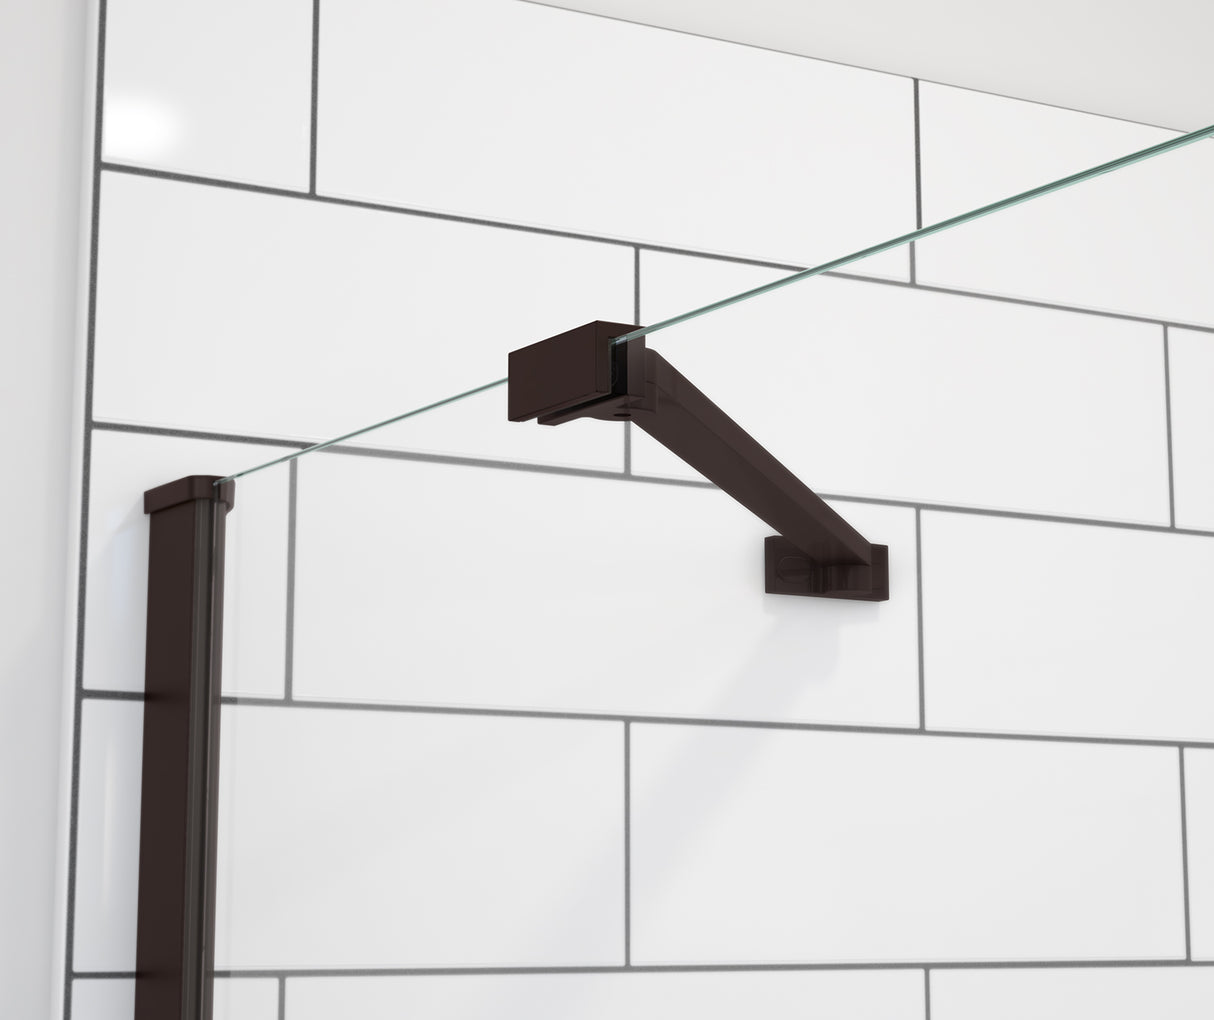 MAAX 139577-900-173-000 Reveal Sleek 71 41 ½-44 ½ x 71 ½ in. 8 mm Pivot Shower Door for Alcove Installation with Clear glass in Dark Bronze